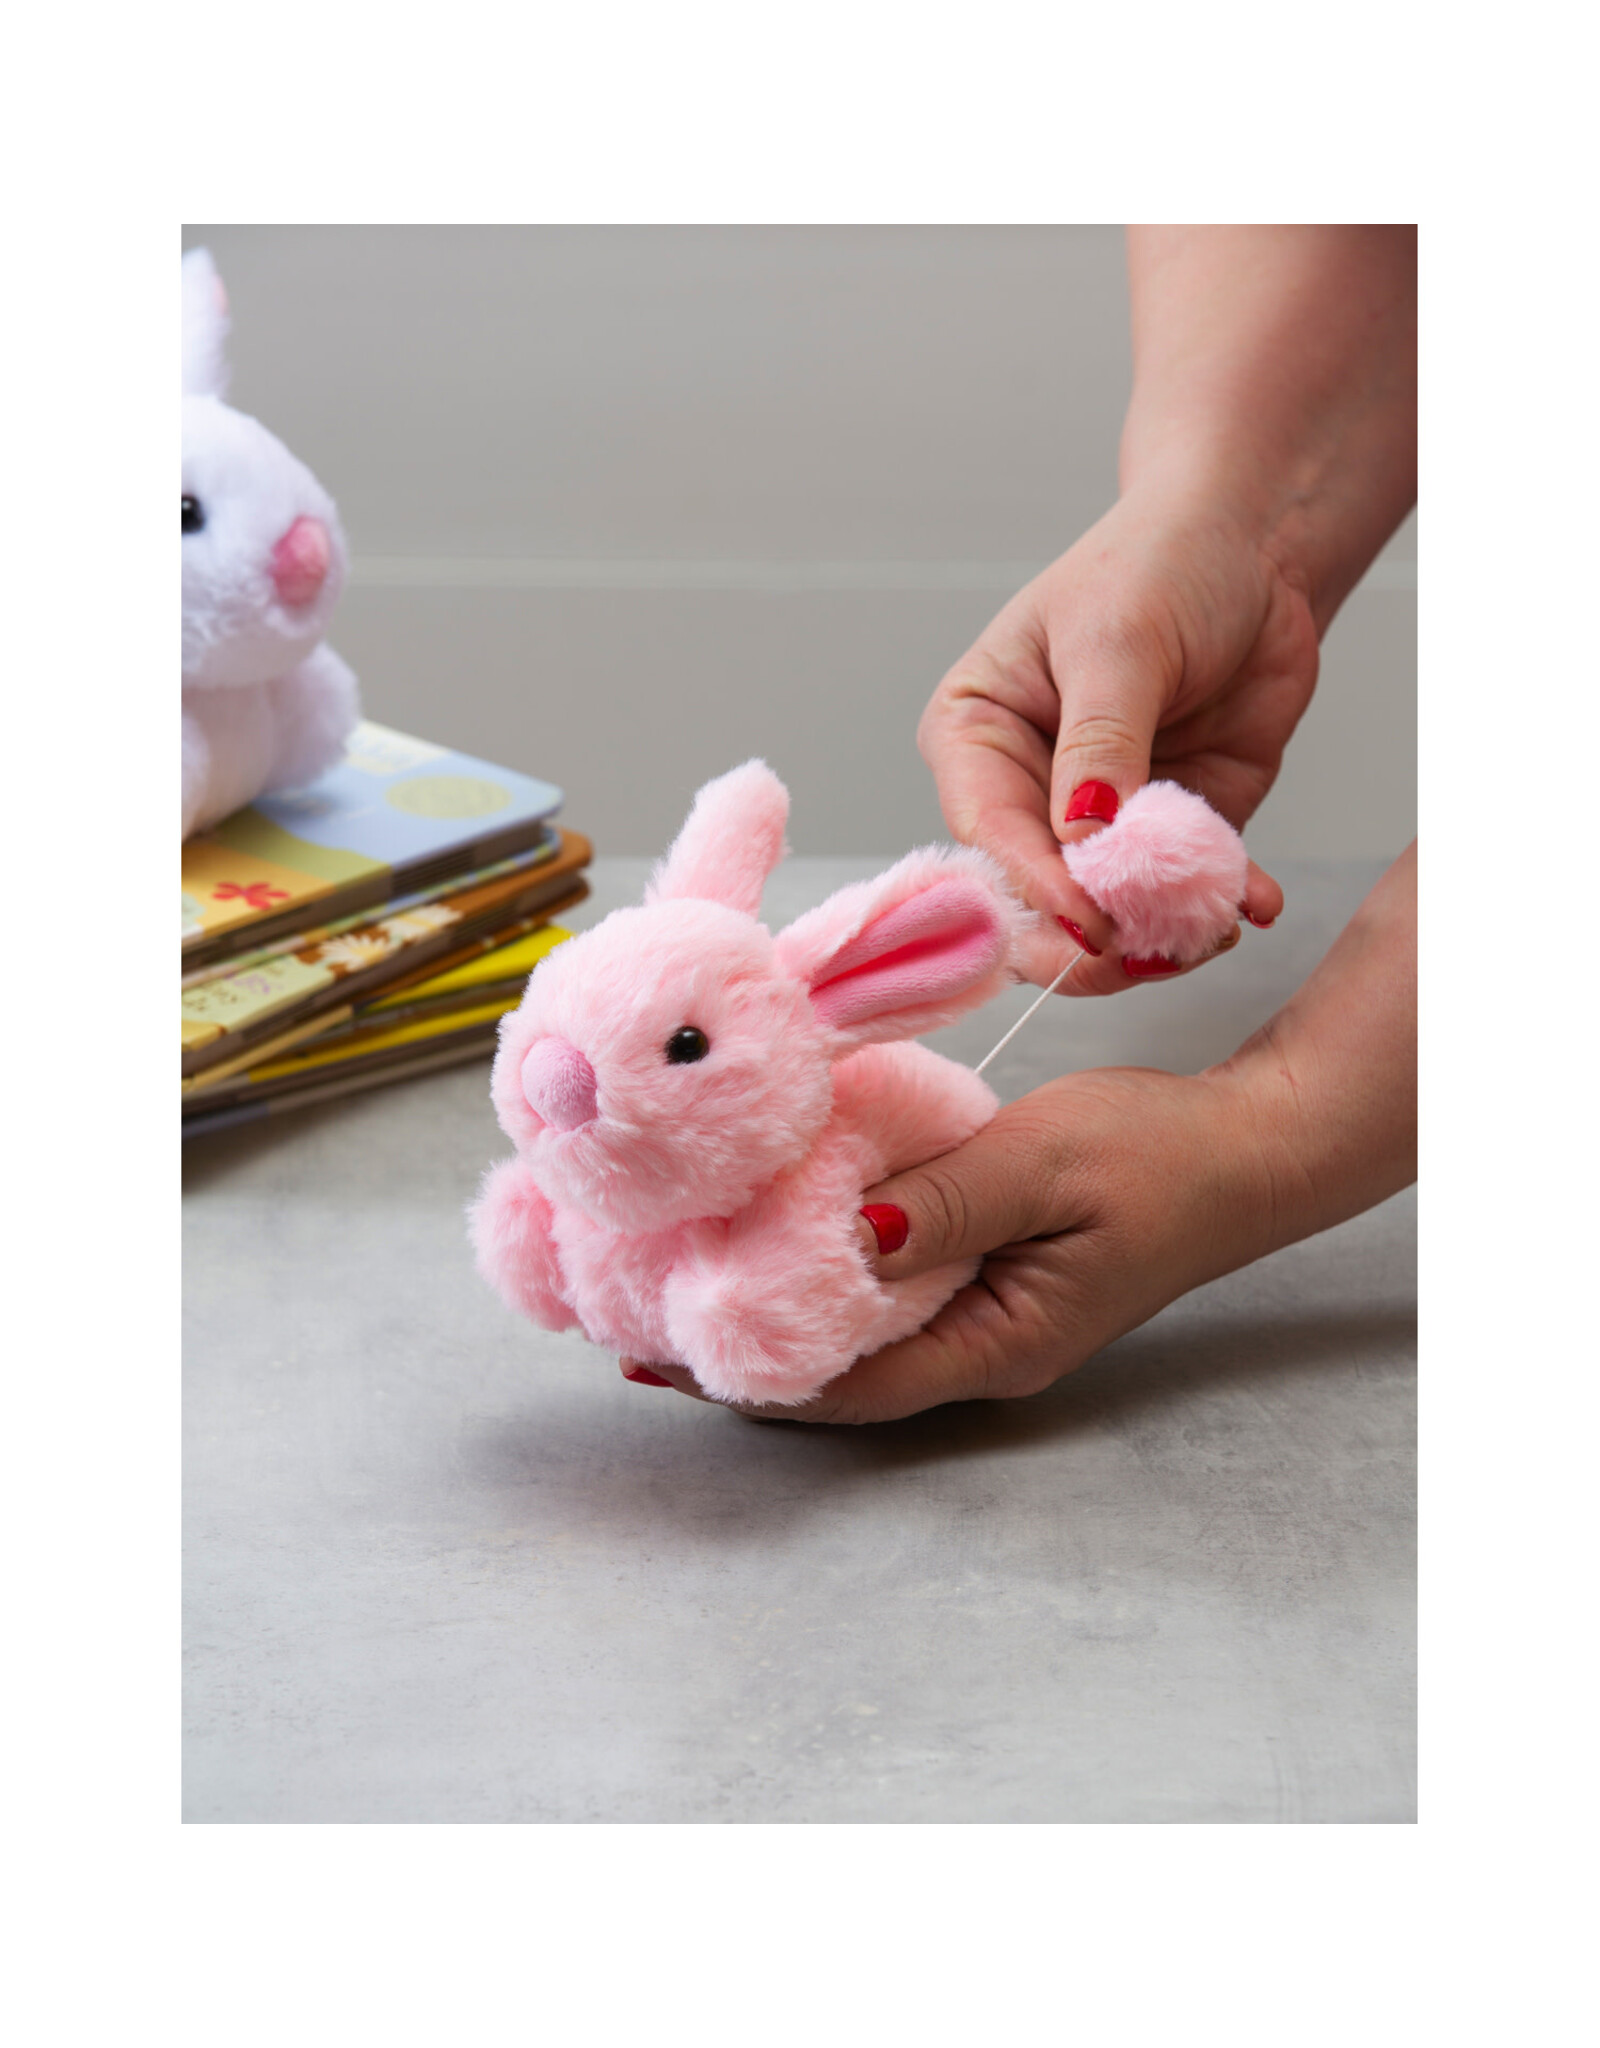 Evergreen Enterprises 5" Plush Pink Bunny with Pull String Movement